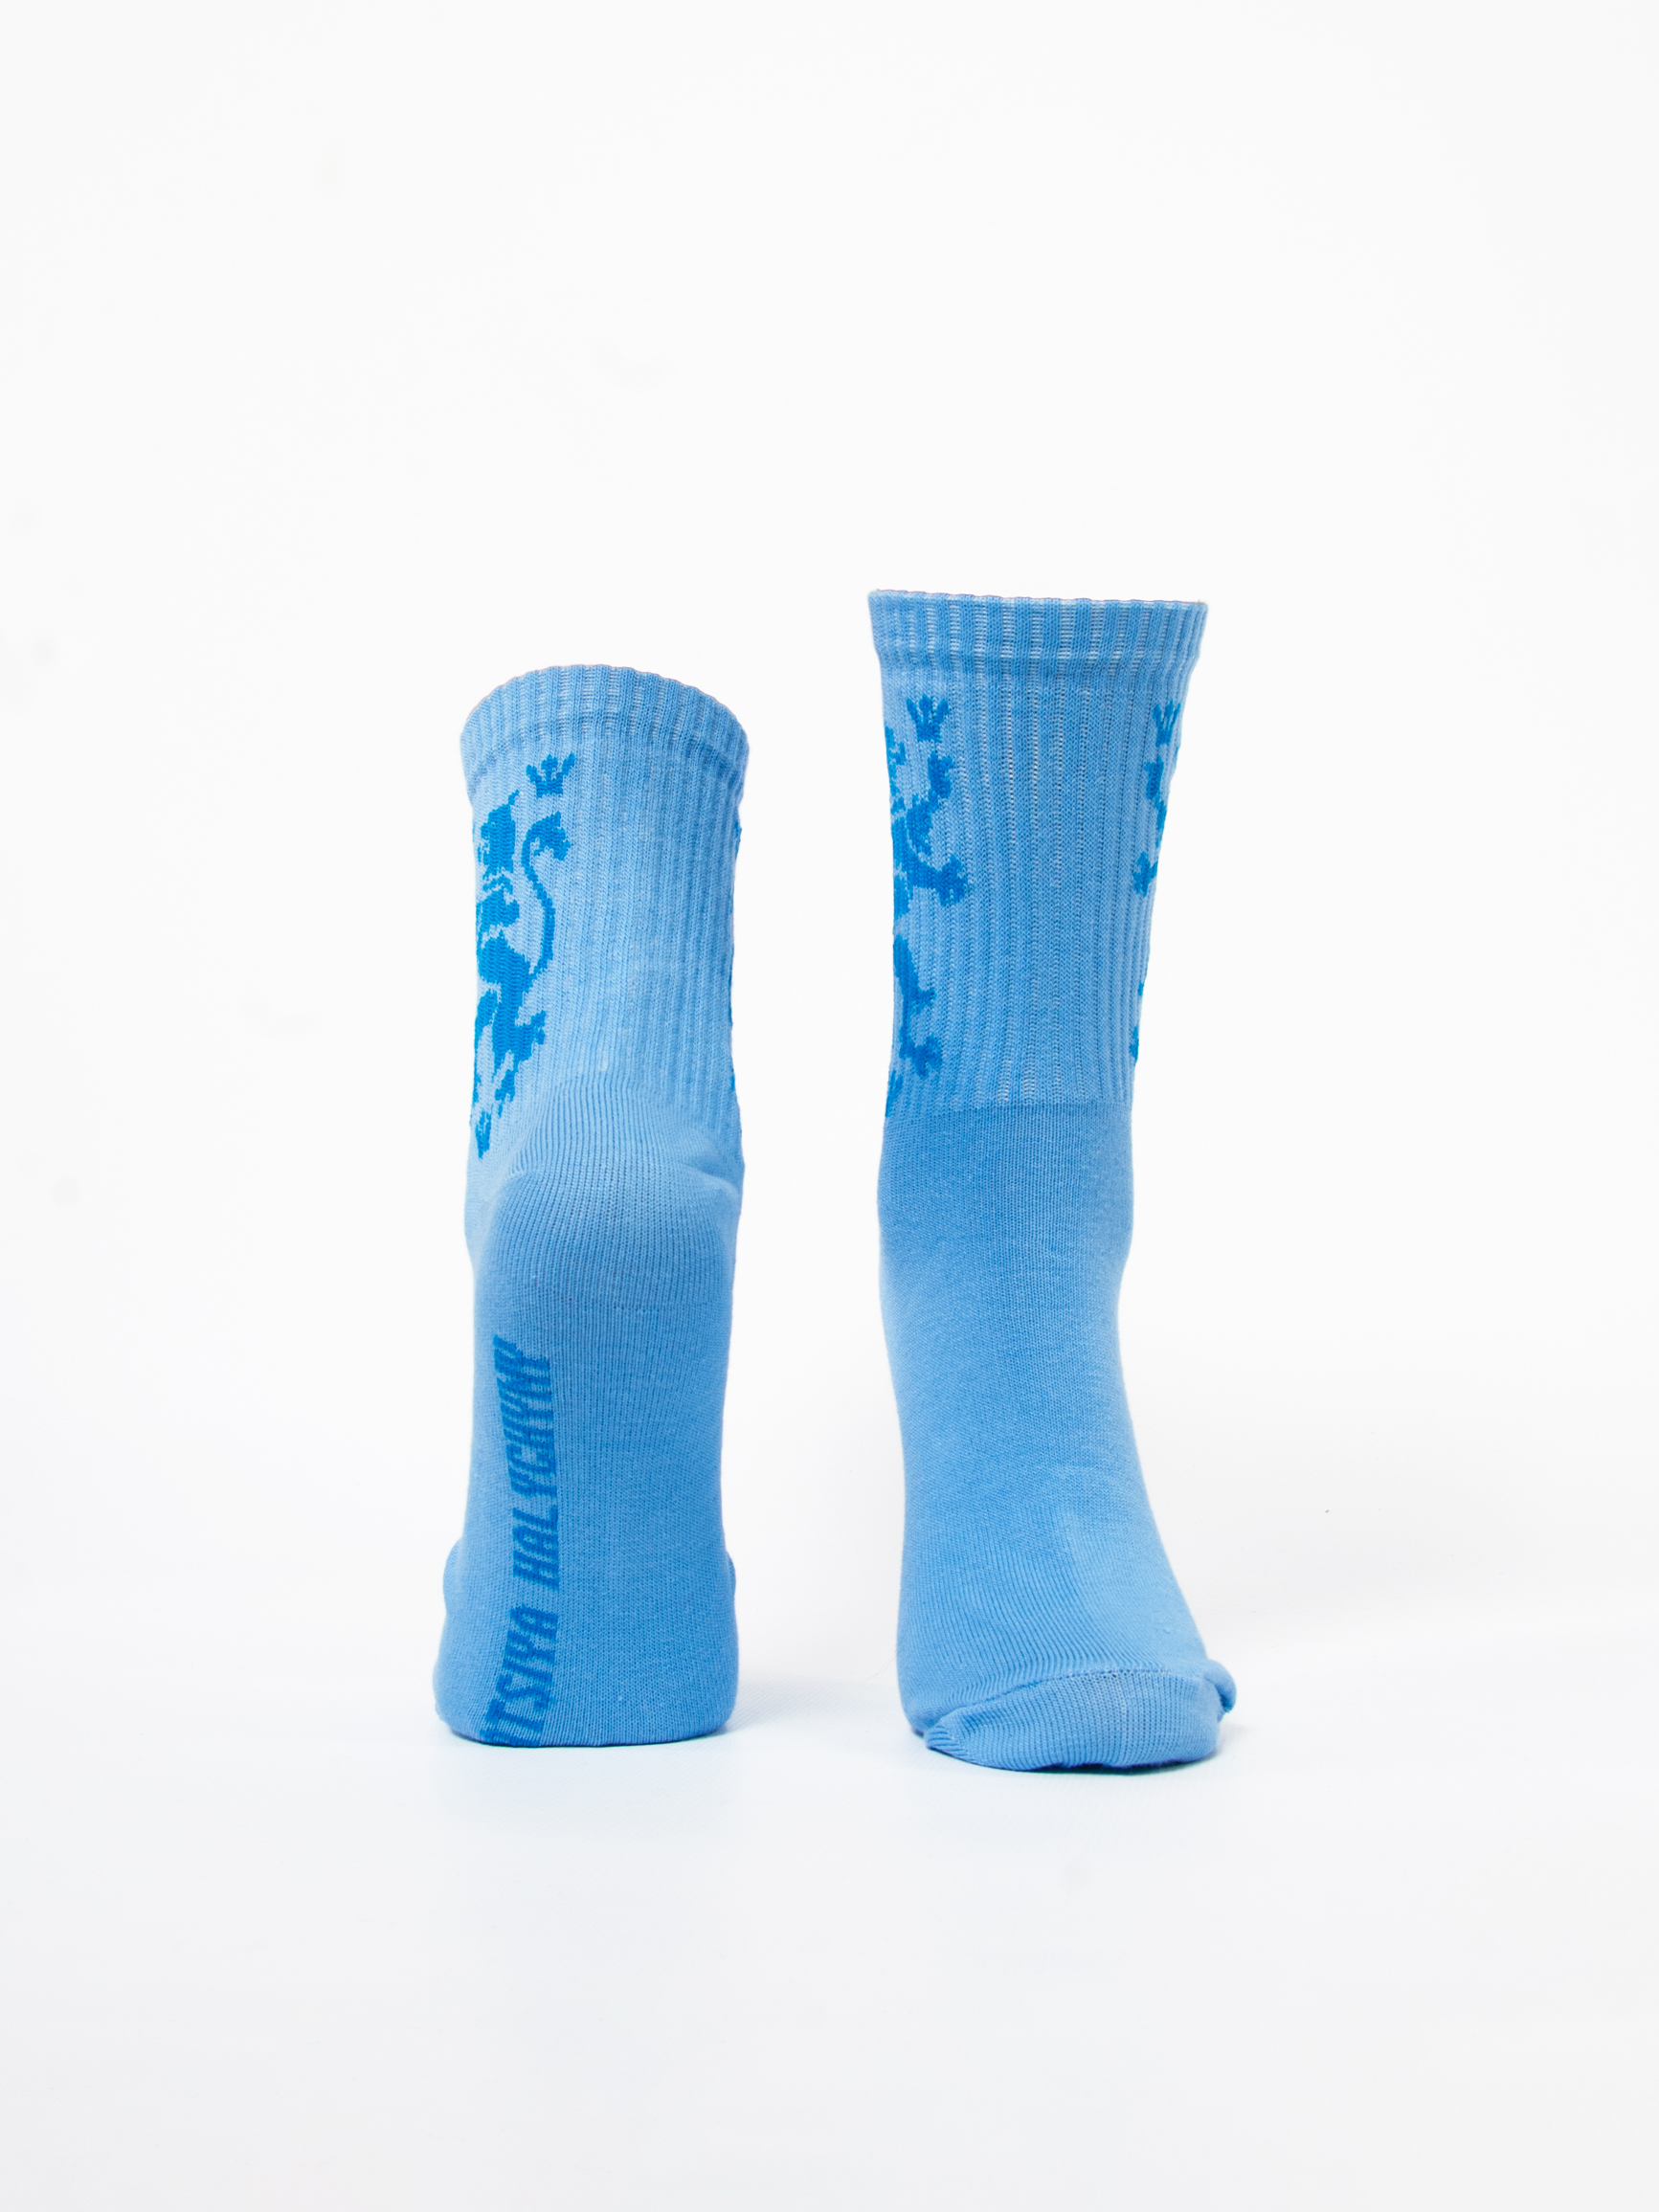 Socks Lion. Color sky blue. 95% cotton, 5% elastane
The product is not subject to return and exchange according to the law.